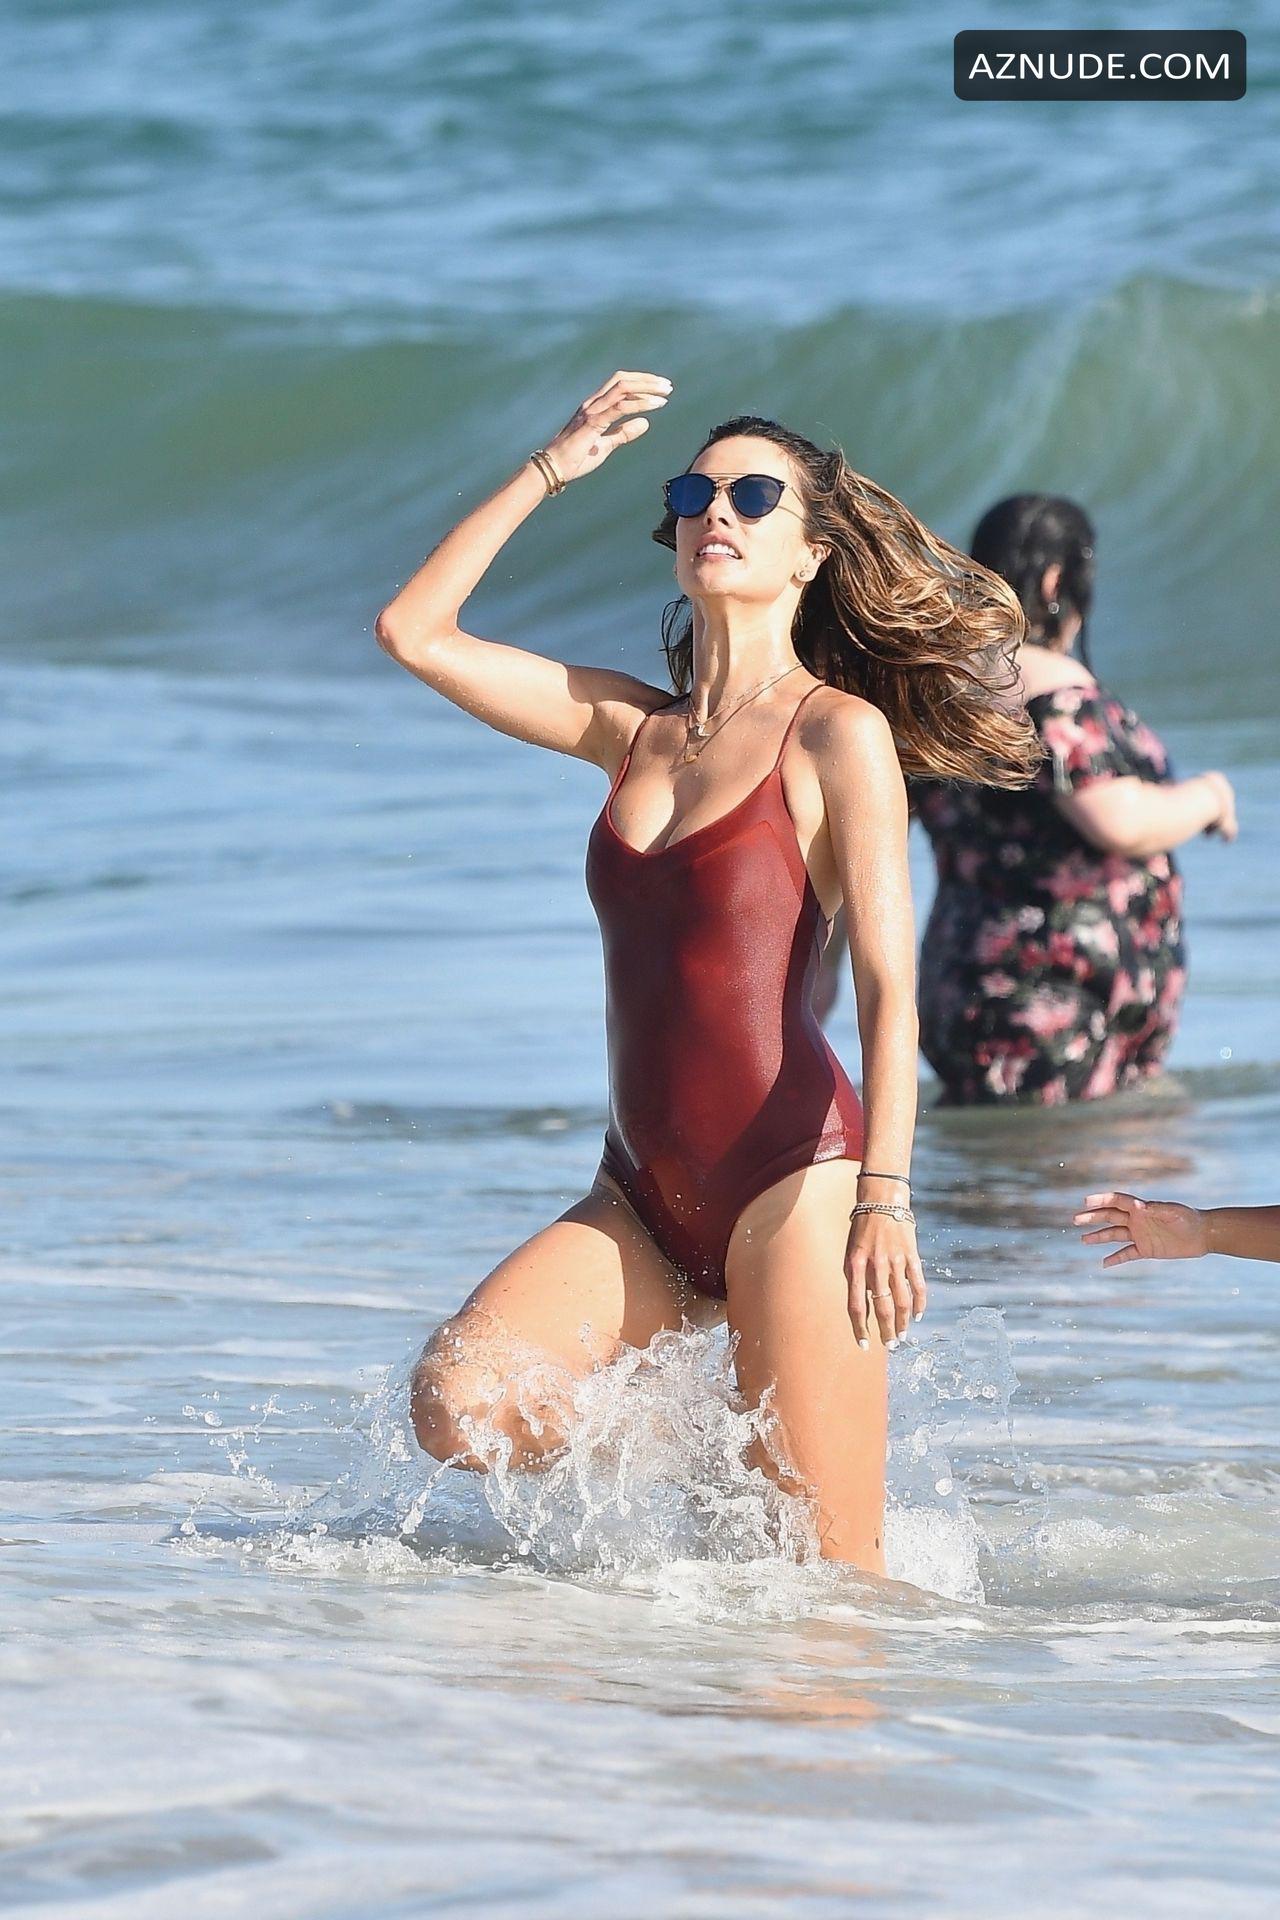 Alessandra Ambrosio In A Red One Piece As She Enjoys The Day On The